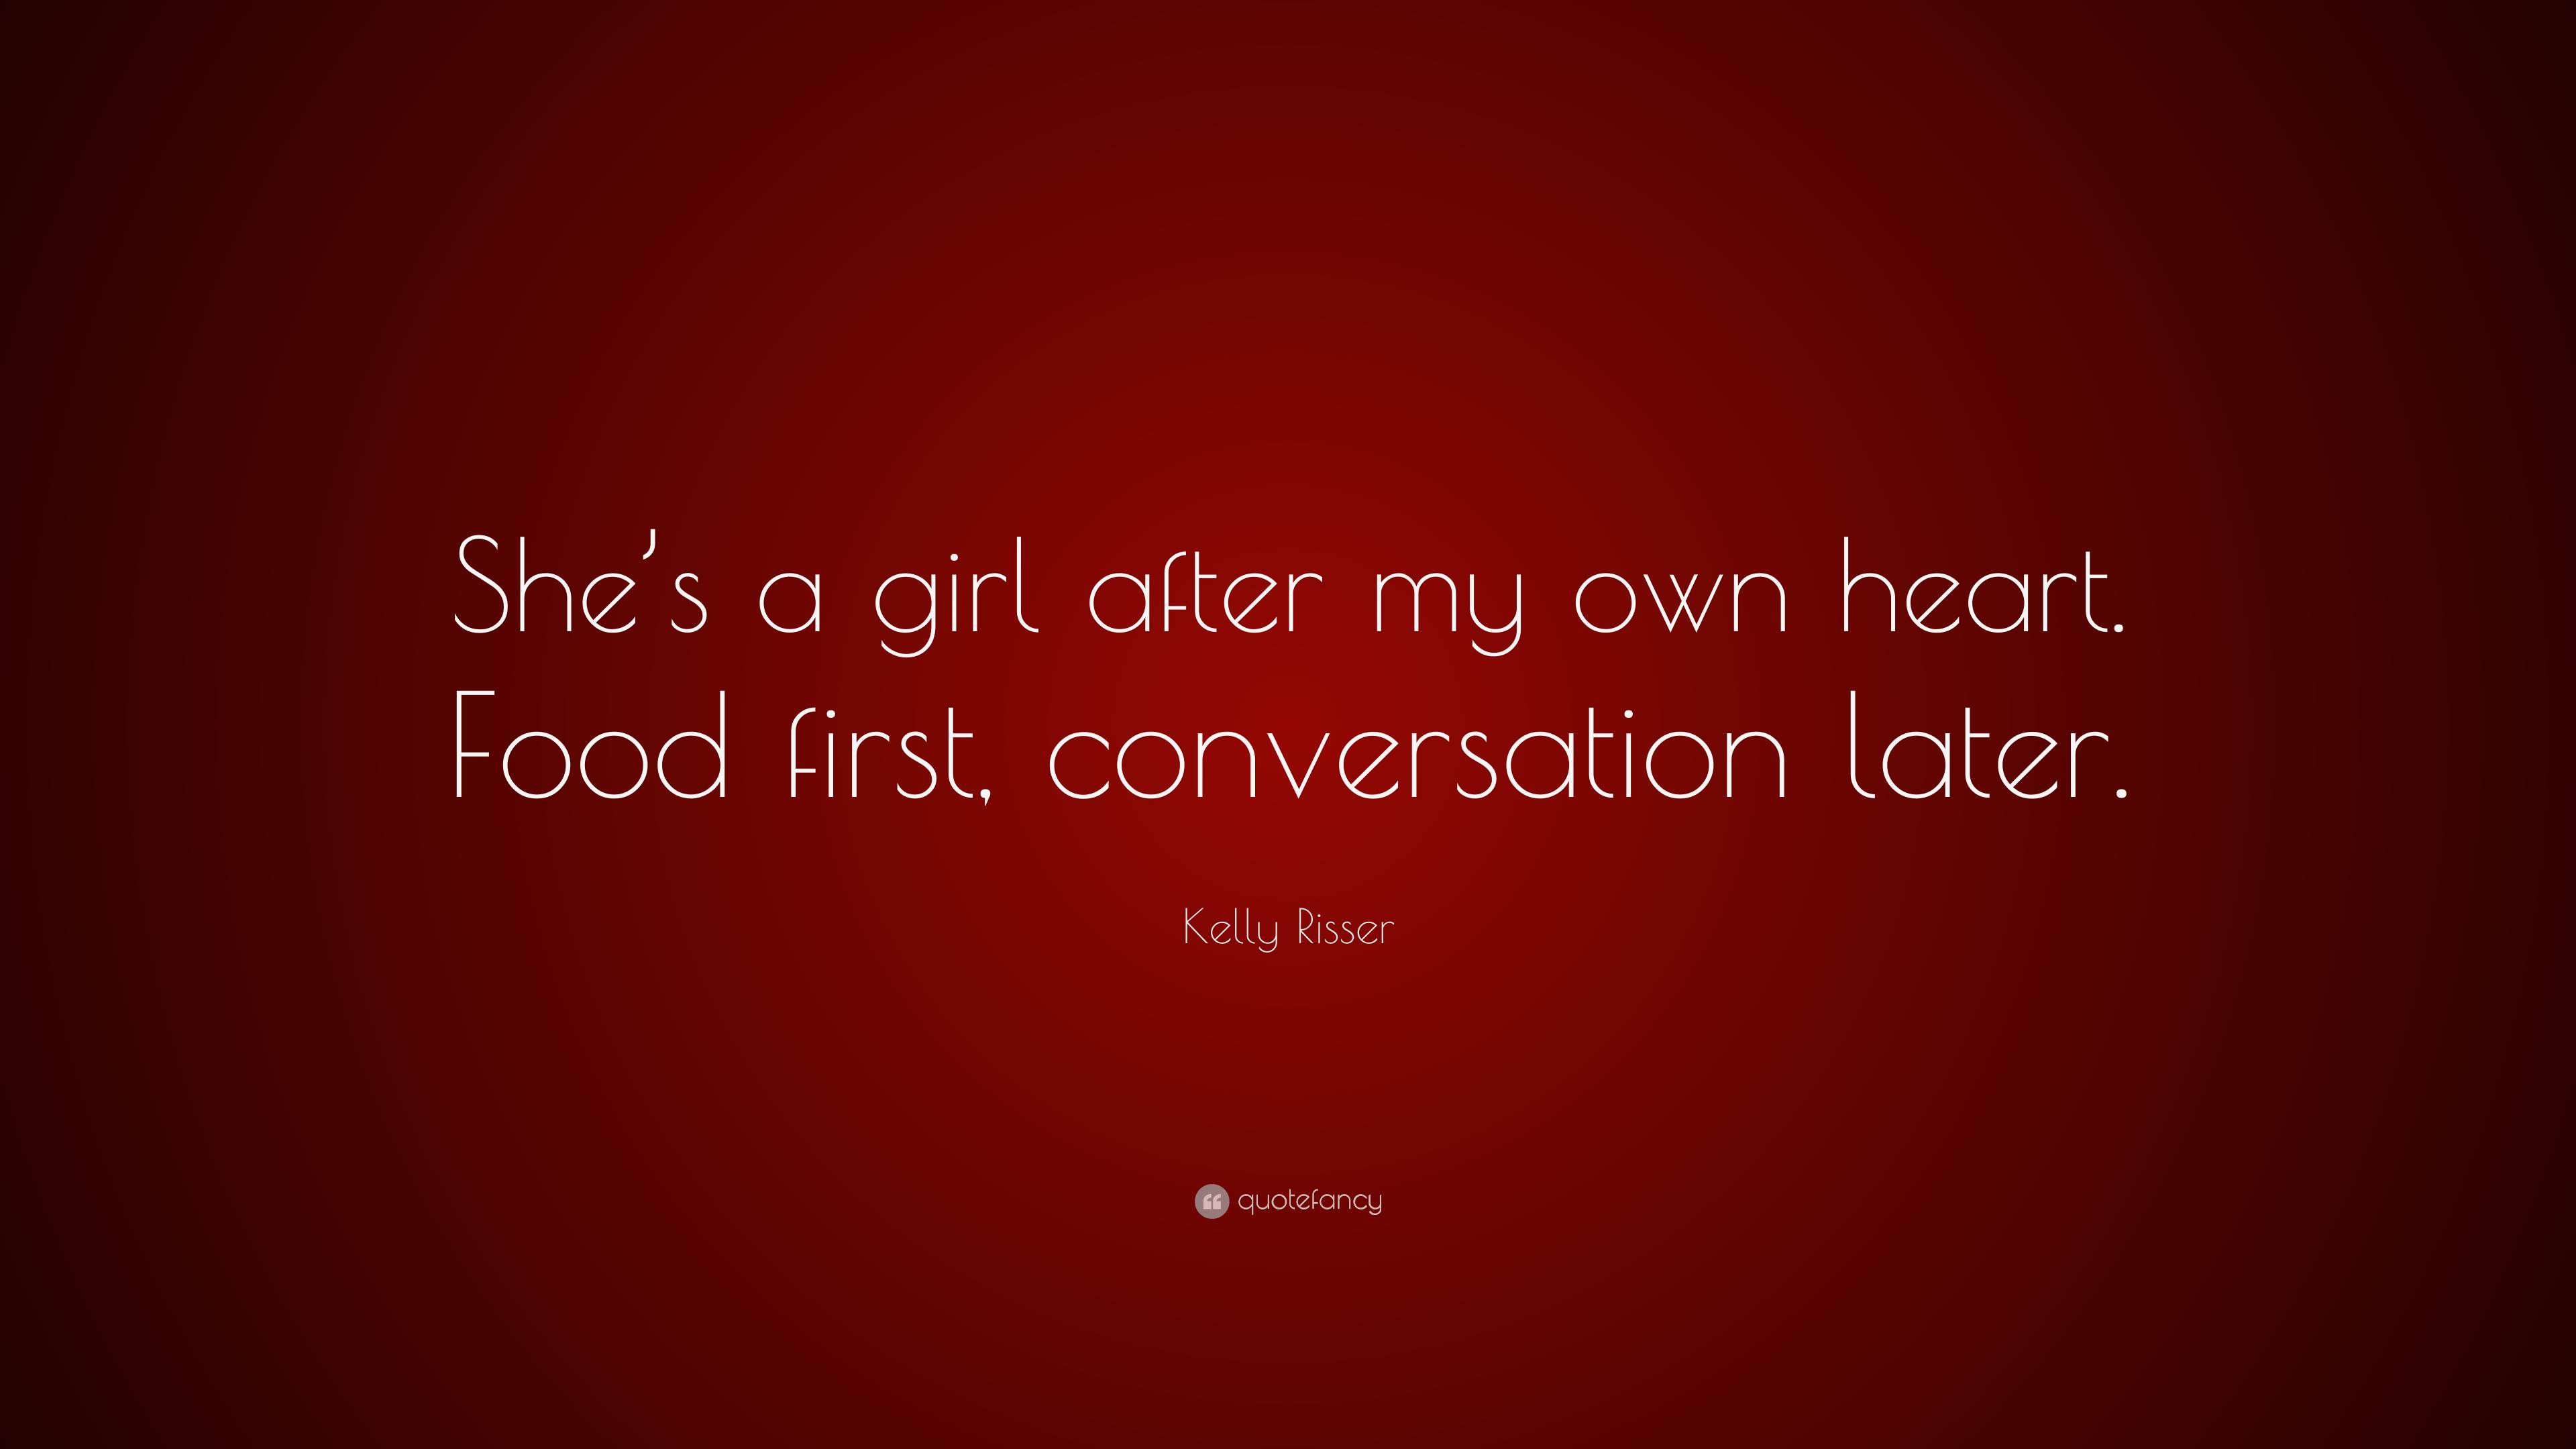 Kelly Risser Quote: “She’s a girl after my own heart. Food first ...